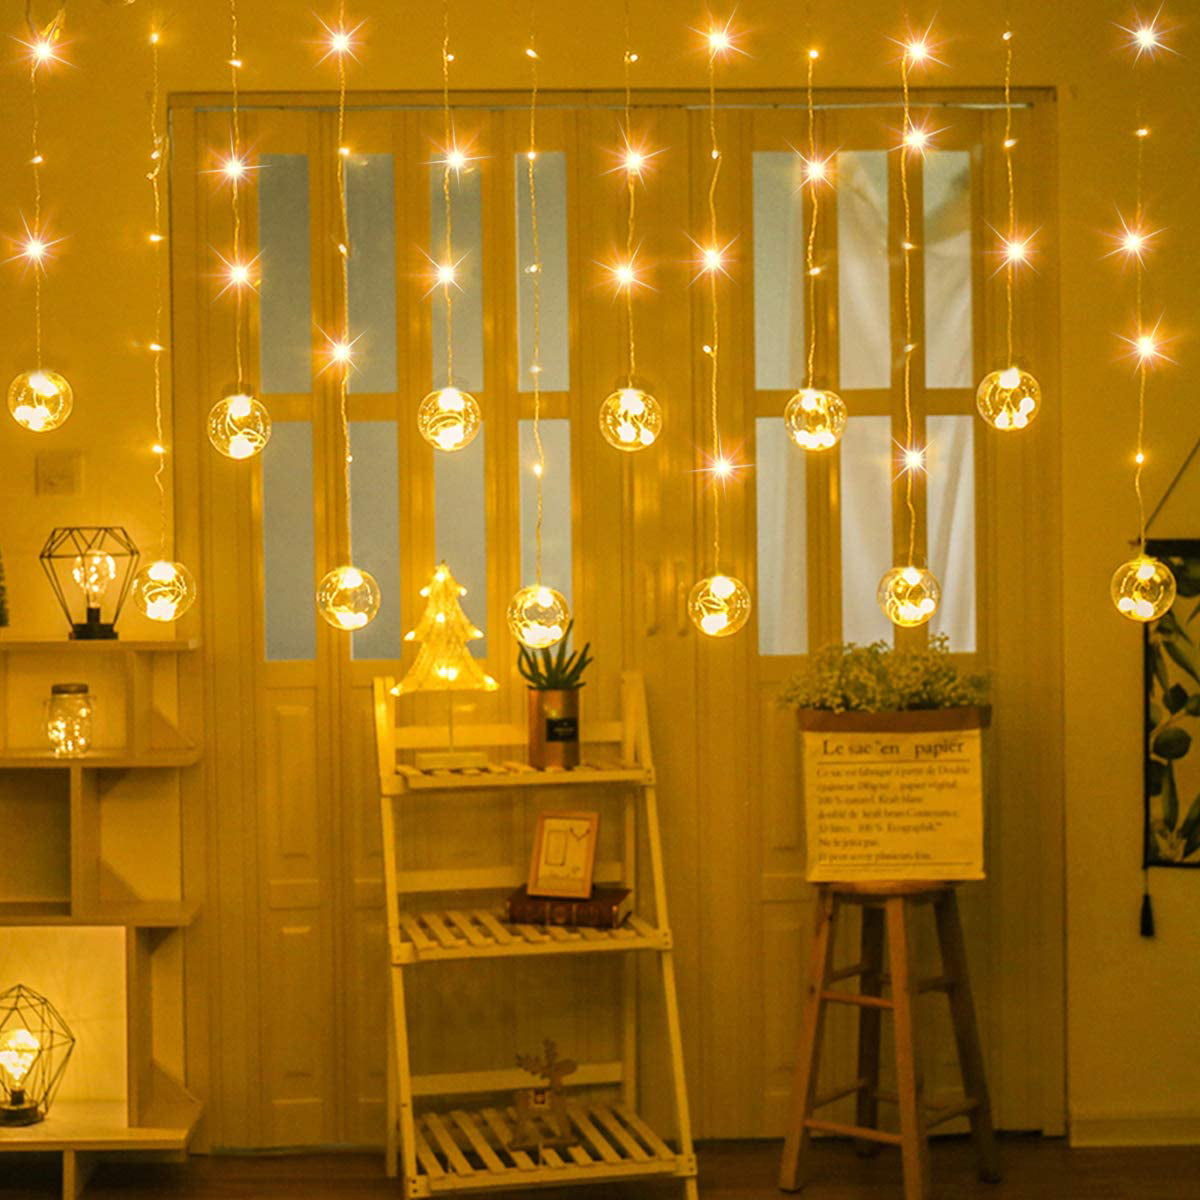 Details about  / Mesh LED Fairy String Lights Christmas Party Ceiling Curtain Outdoor Lighting